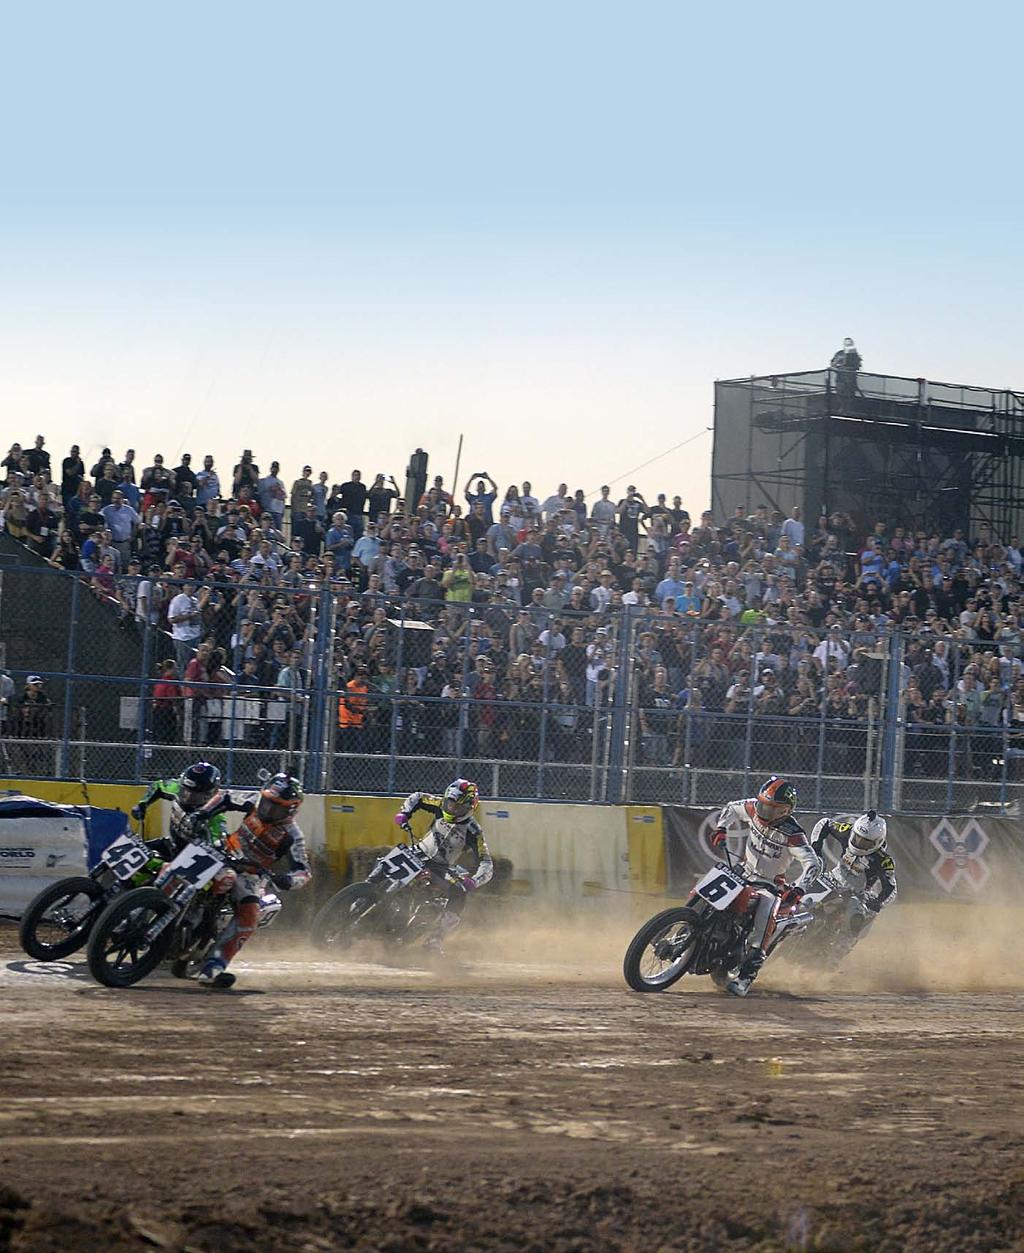 JUNE 4, 2015 CIRCUIT OF THE AMERICAS/AUSTIN, TEXAS FLAT TRACK X GAMES HARLEY-DAVIDSON FLAT TRACK P66 BY ANDREA WILSON PHOTOGRAPHY BY DAVE HOENIG AND ANDREA WILSON Flat track racing has been around